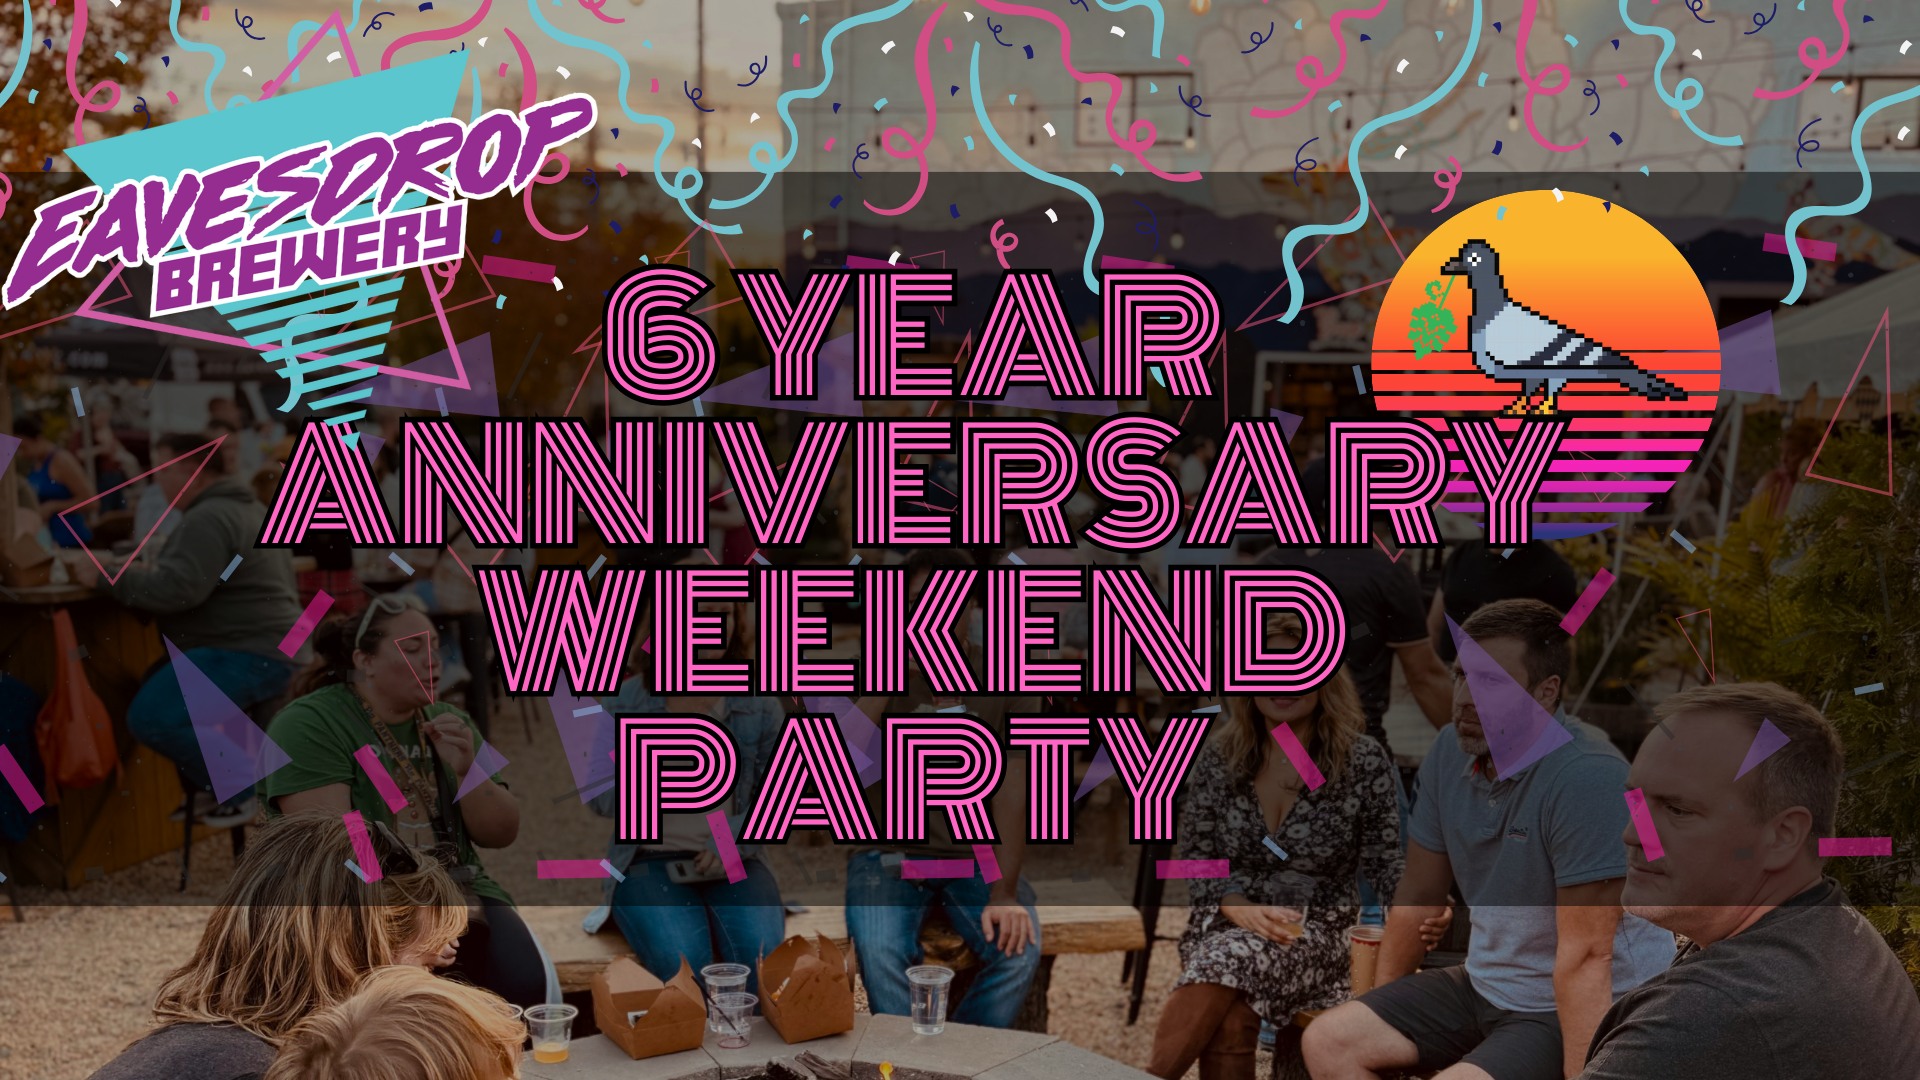 Anniversary weekend party